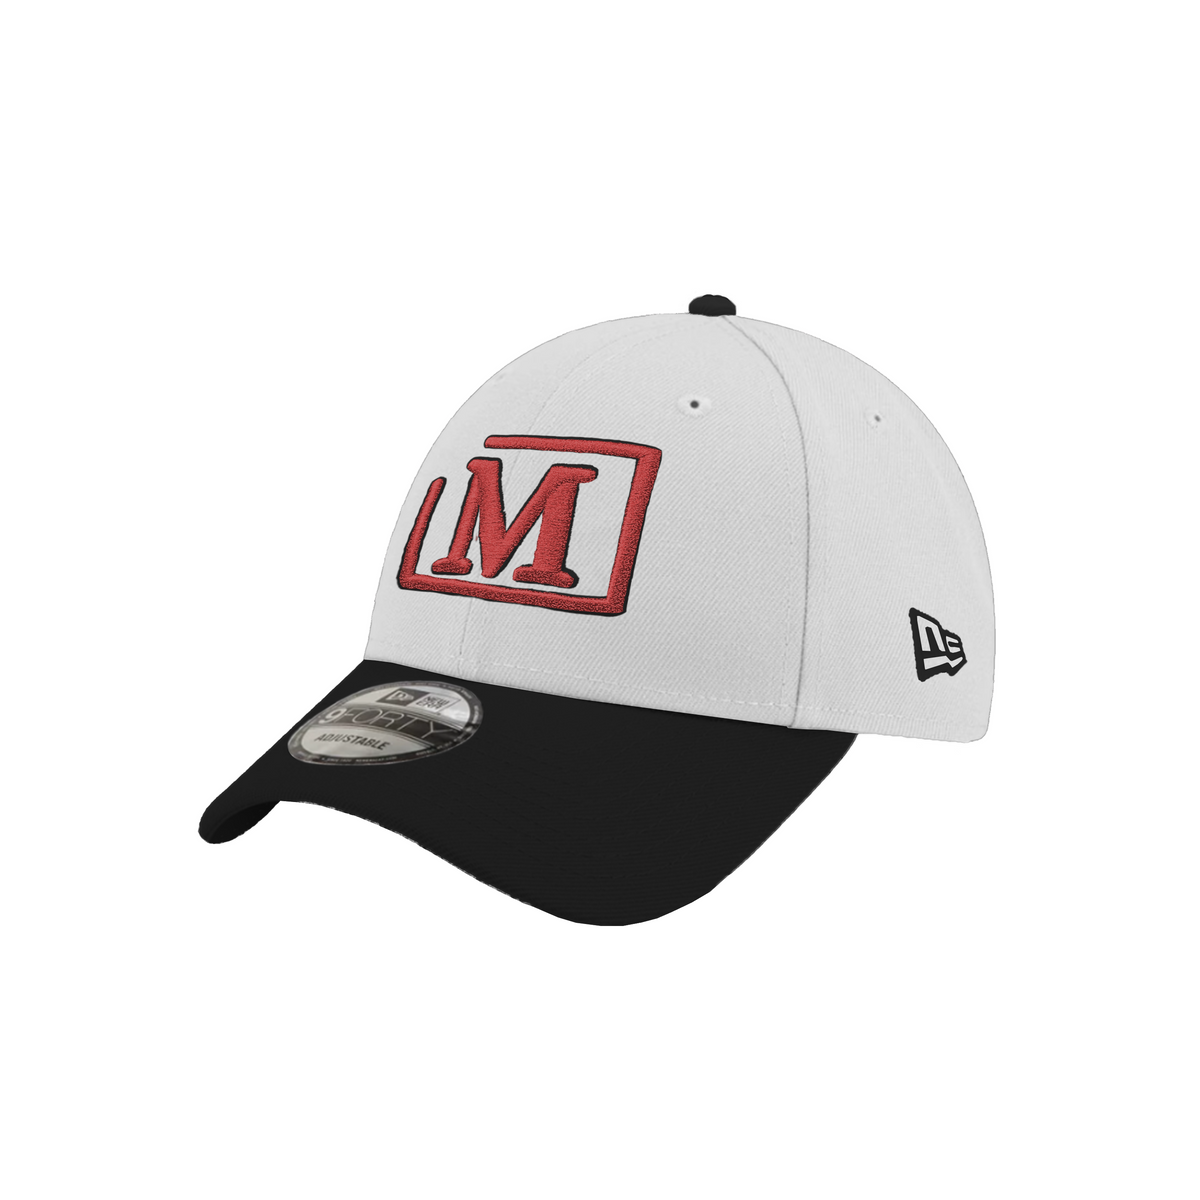 MDB Brand x New Era 9Forty Stretch Snap Embroidered Cap - Two Tone w/ Neutral